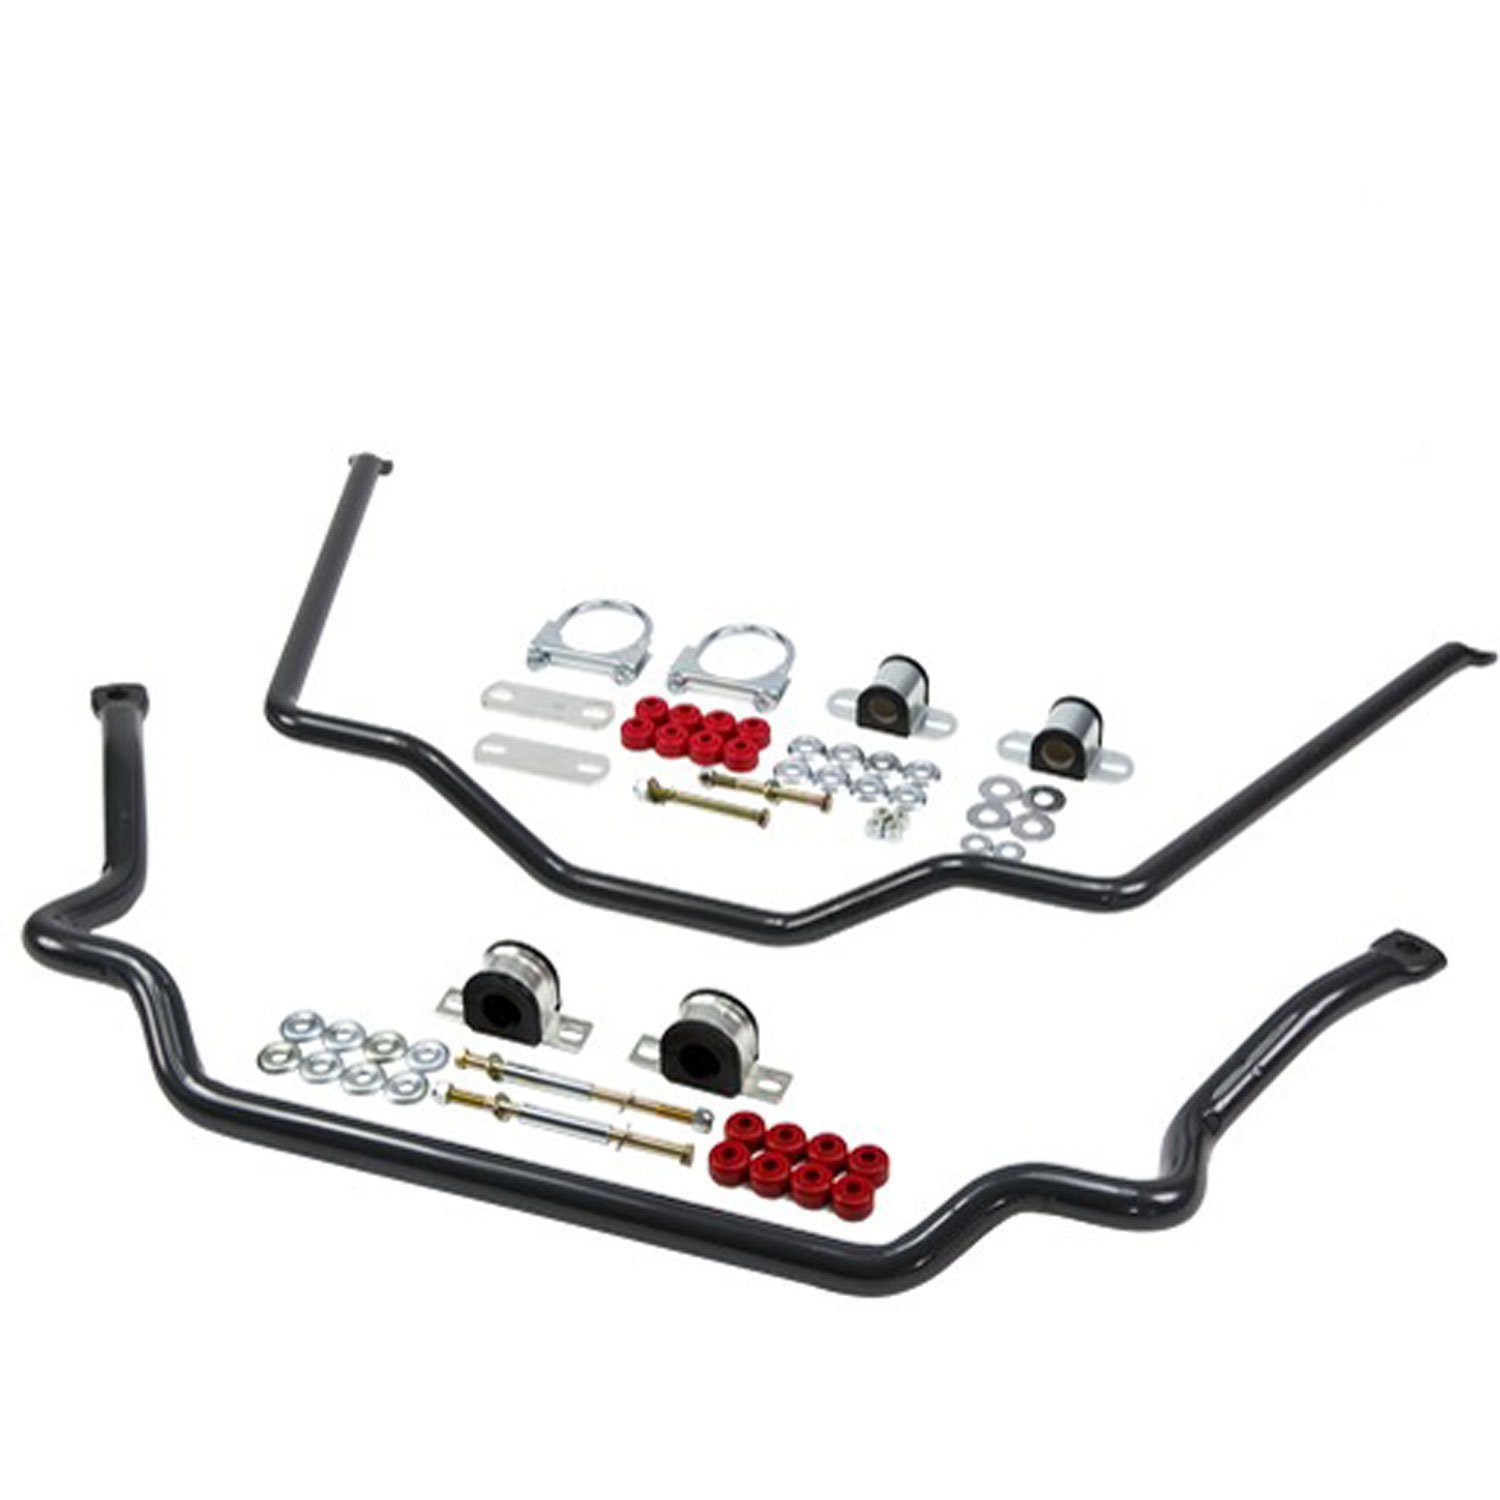 Front/Rear Sway Bar Kit for 1982-2004 S-Series Pick-Up Trucks